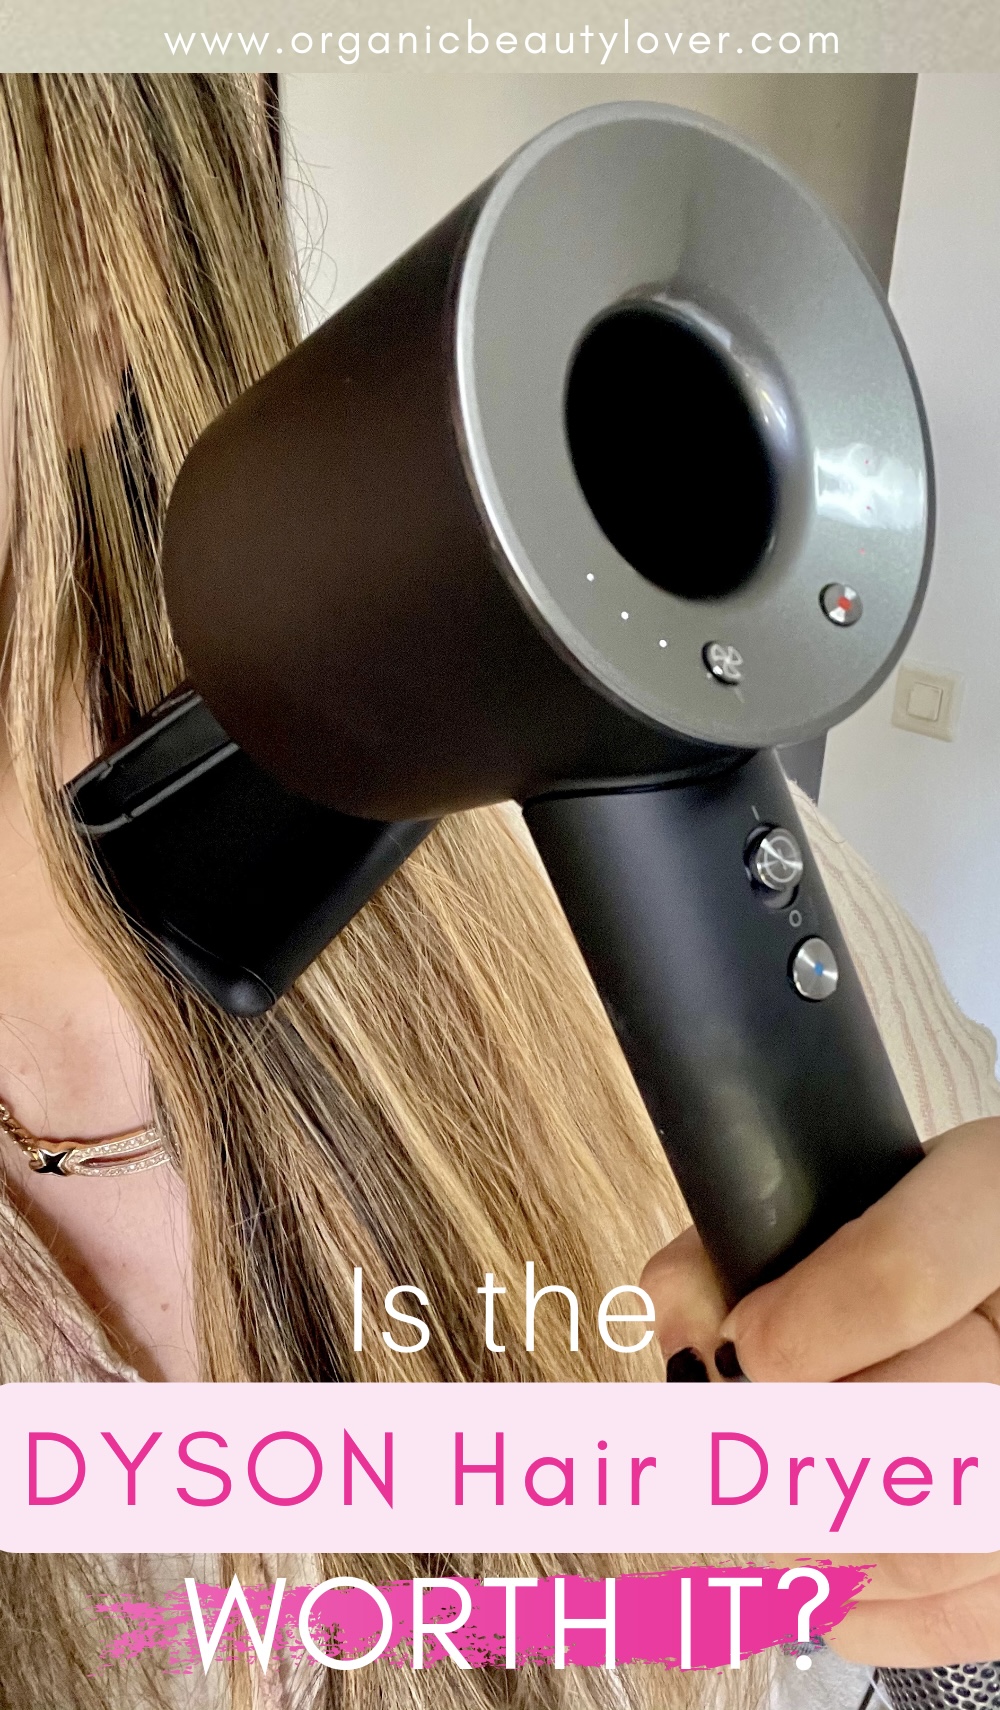 Dyson Supersonic Dryer Review: Is It It? - Organic Beauty Lover